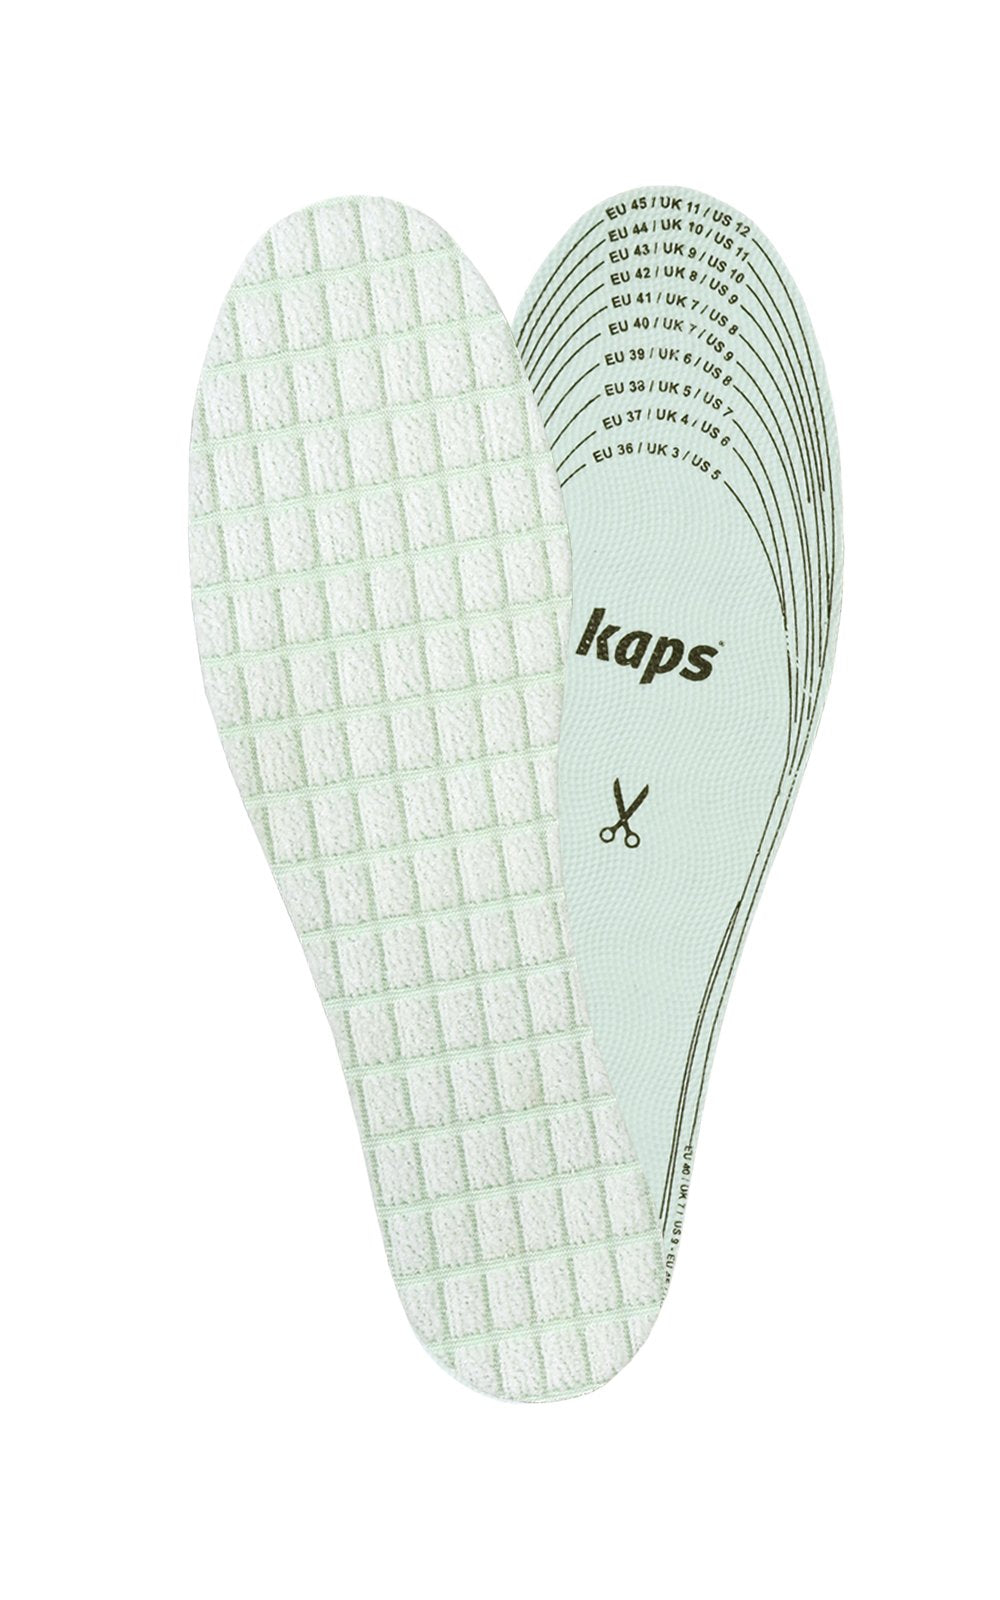 [Australia] - Kaps Antifungal Insoles with Bamboo, Alum and Charcoal, Shoe Insoles Men Women Against Athletes Foot Mycosis and Odour, White, Cut to Fit Cut to Size 